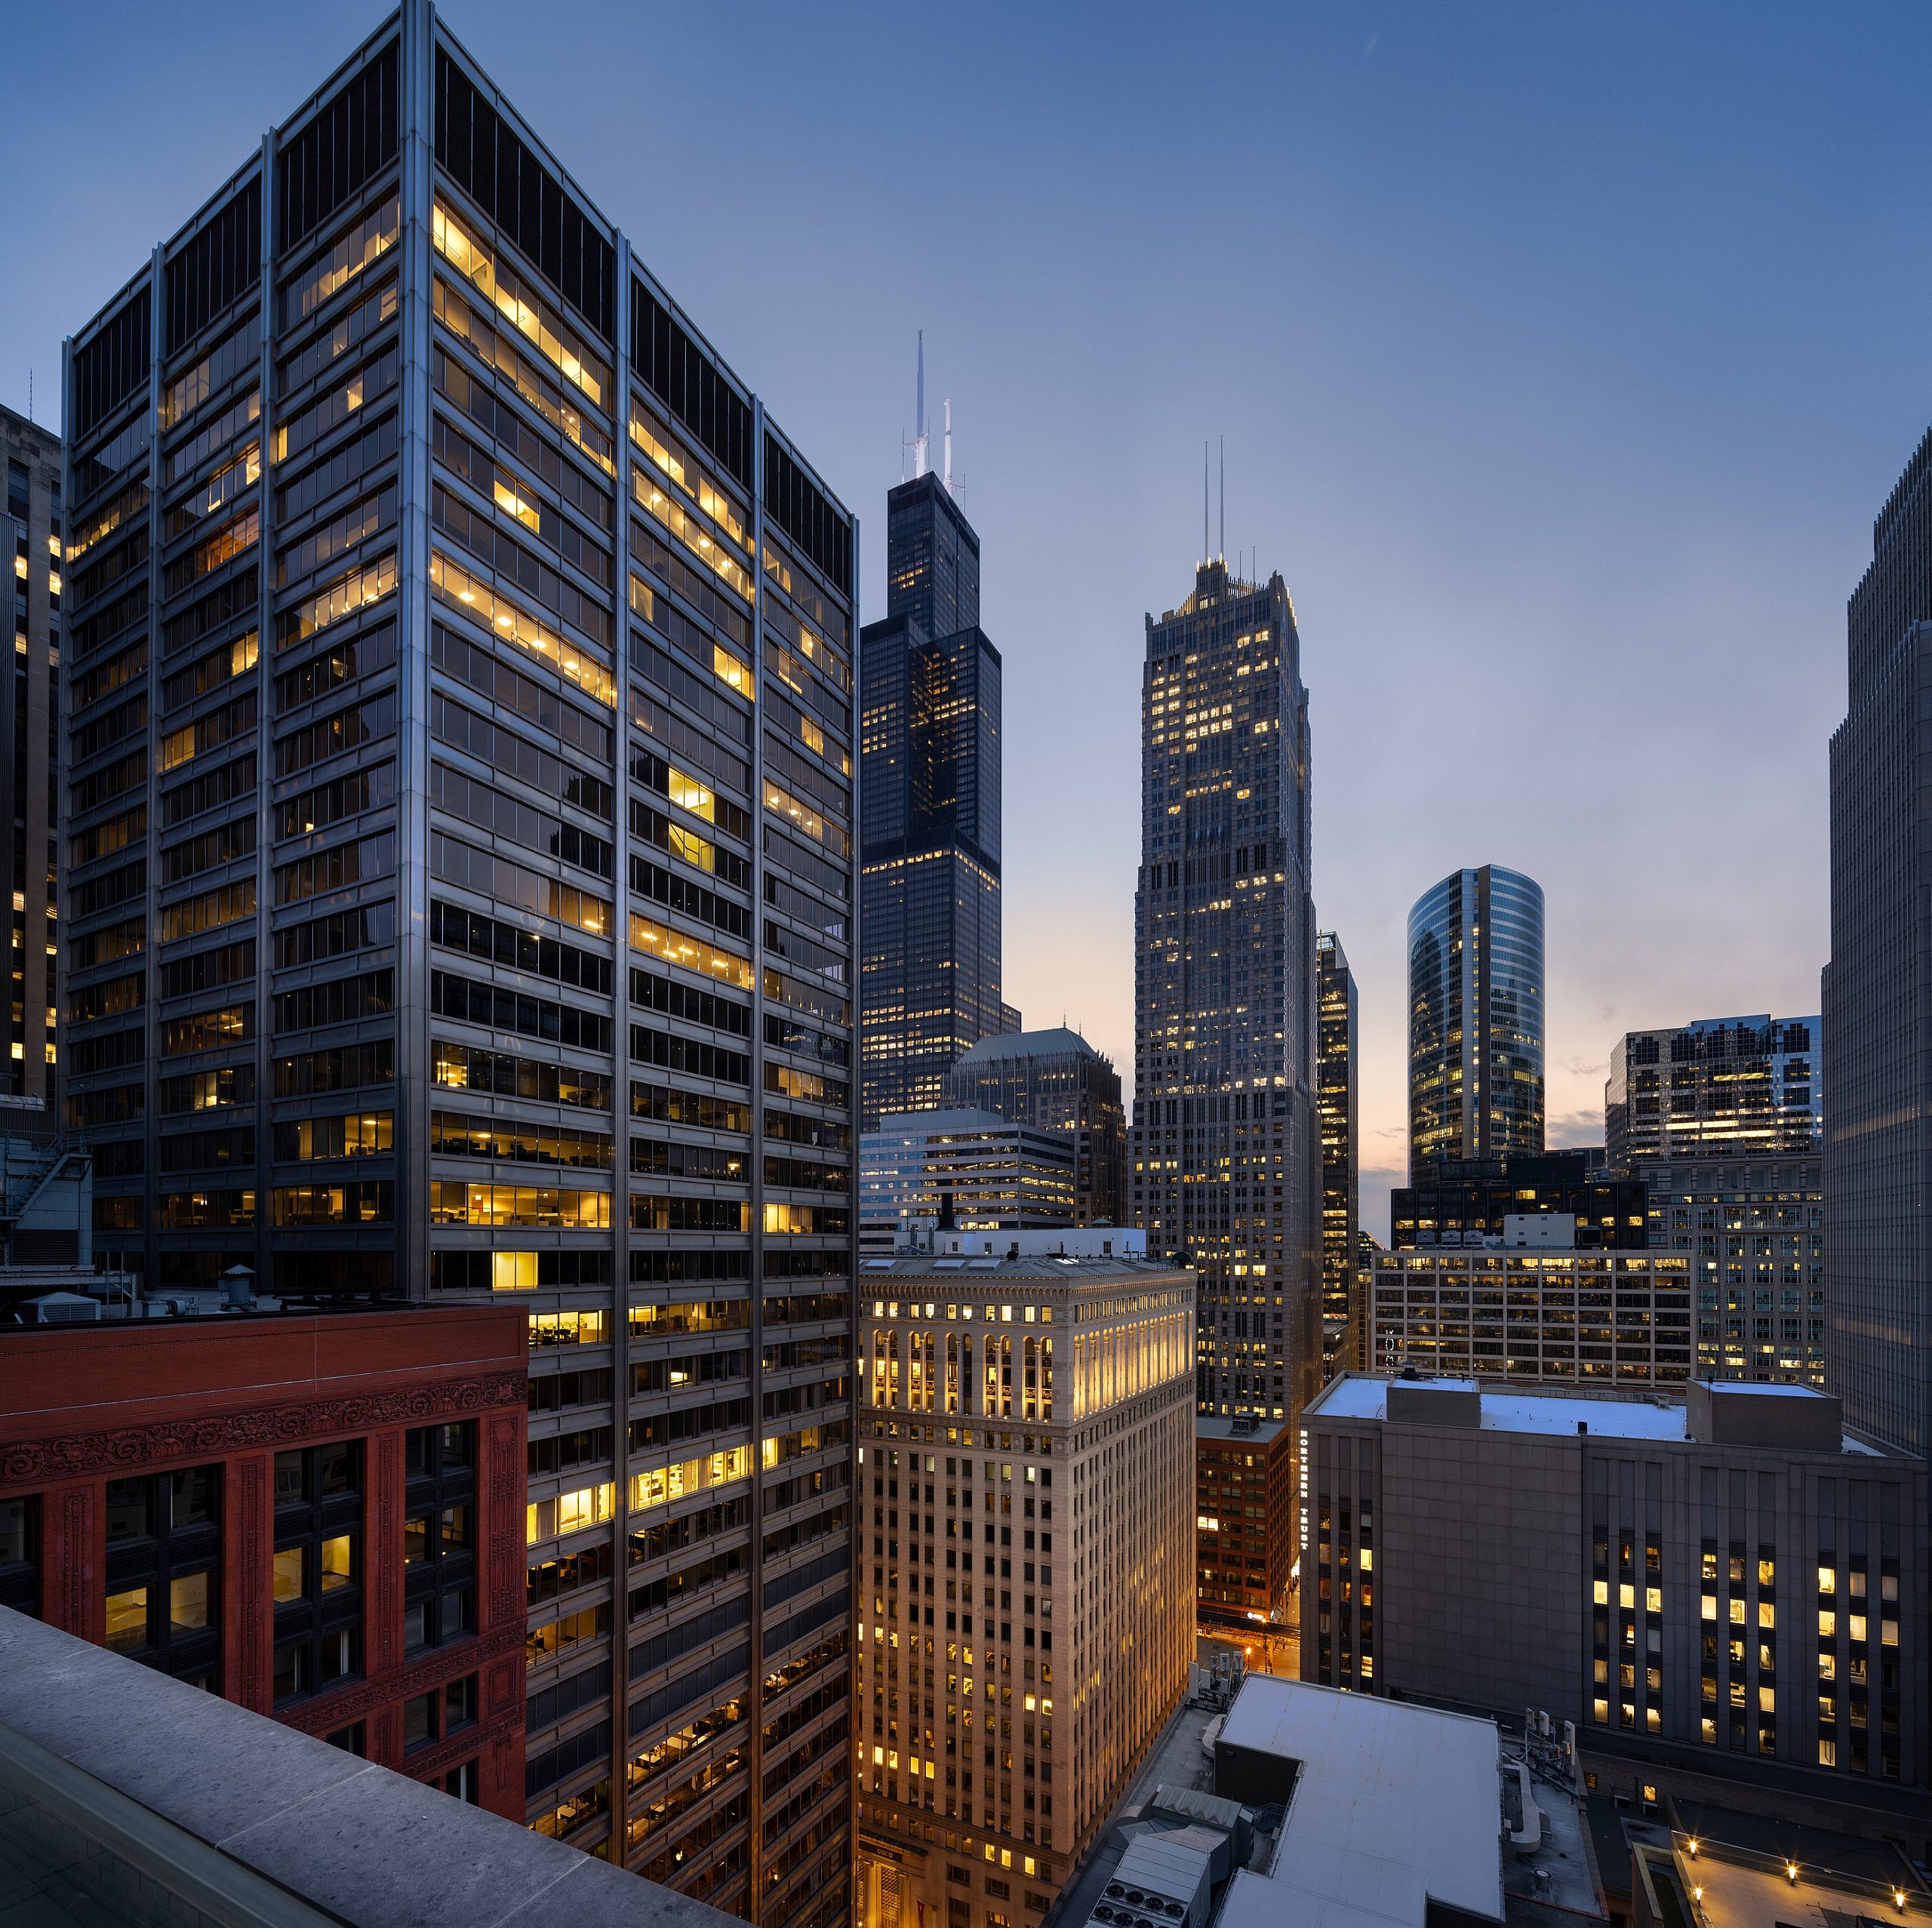 The skyline of Chicago as seen from the rooftop of 100 W. Monroe Street Chicago